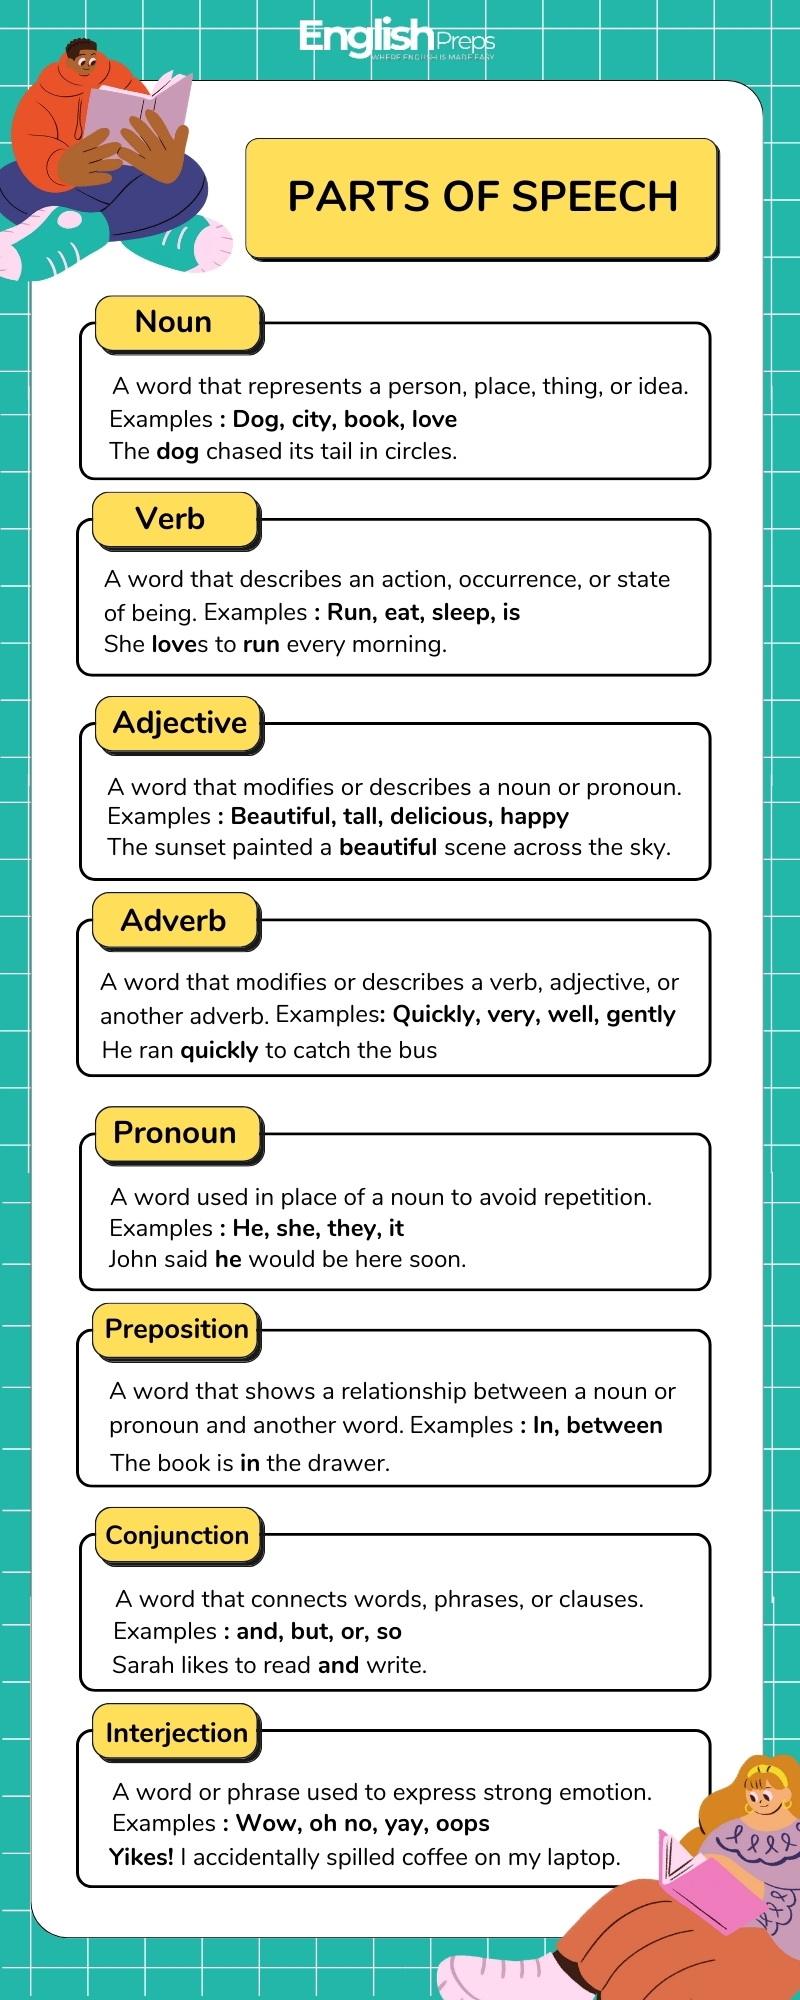 8 Parts of Speech infographic